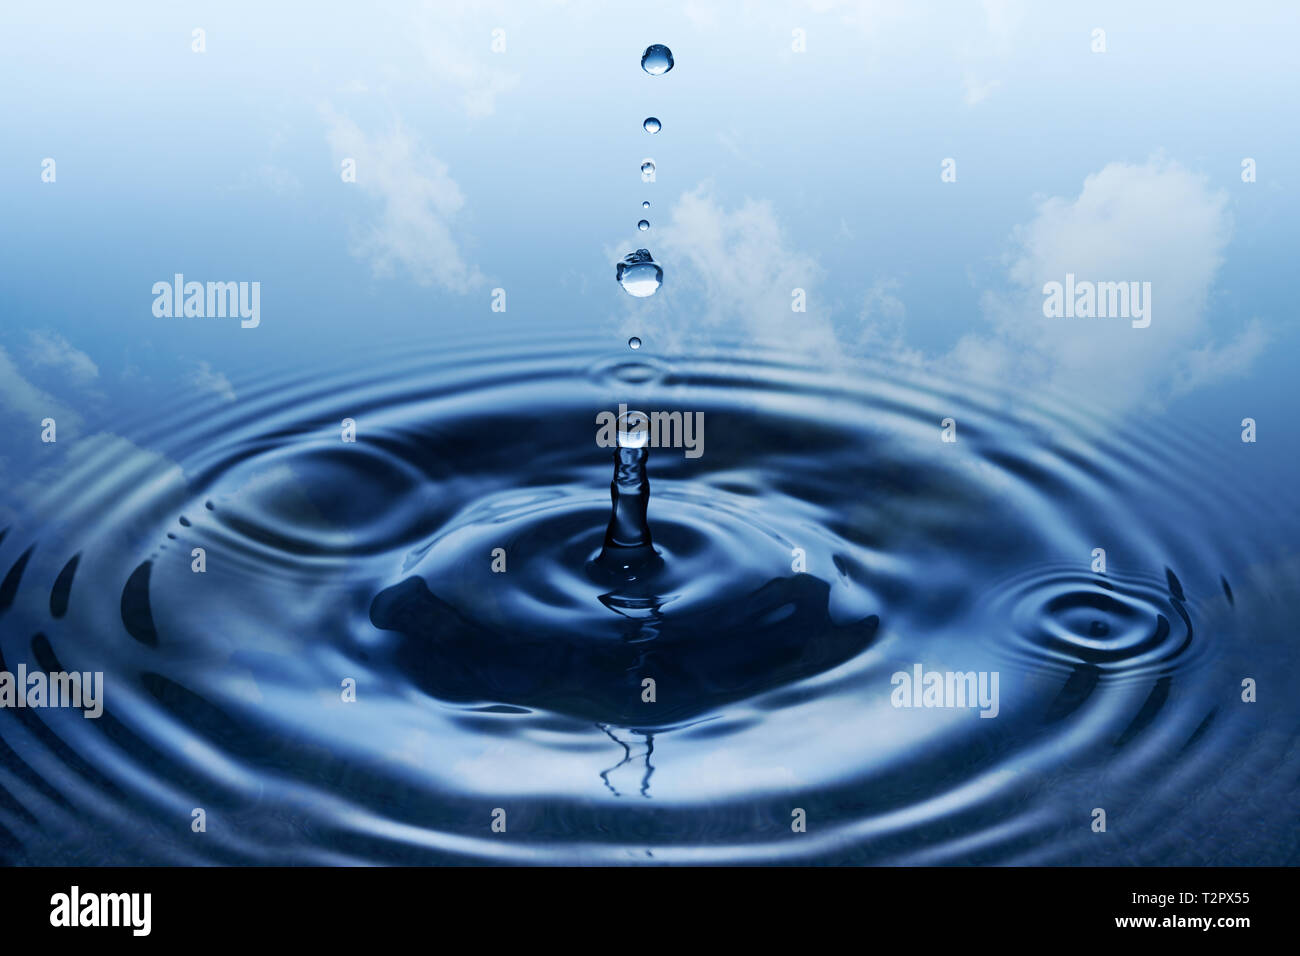 Splash. Round rain drops falling on smooth surface of water. Blue sky and white clouds in background. Stock Photo